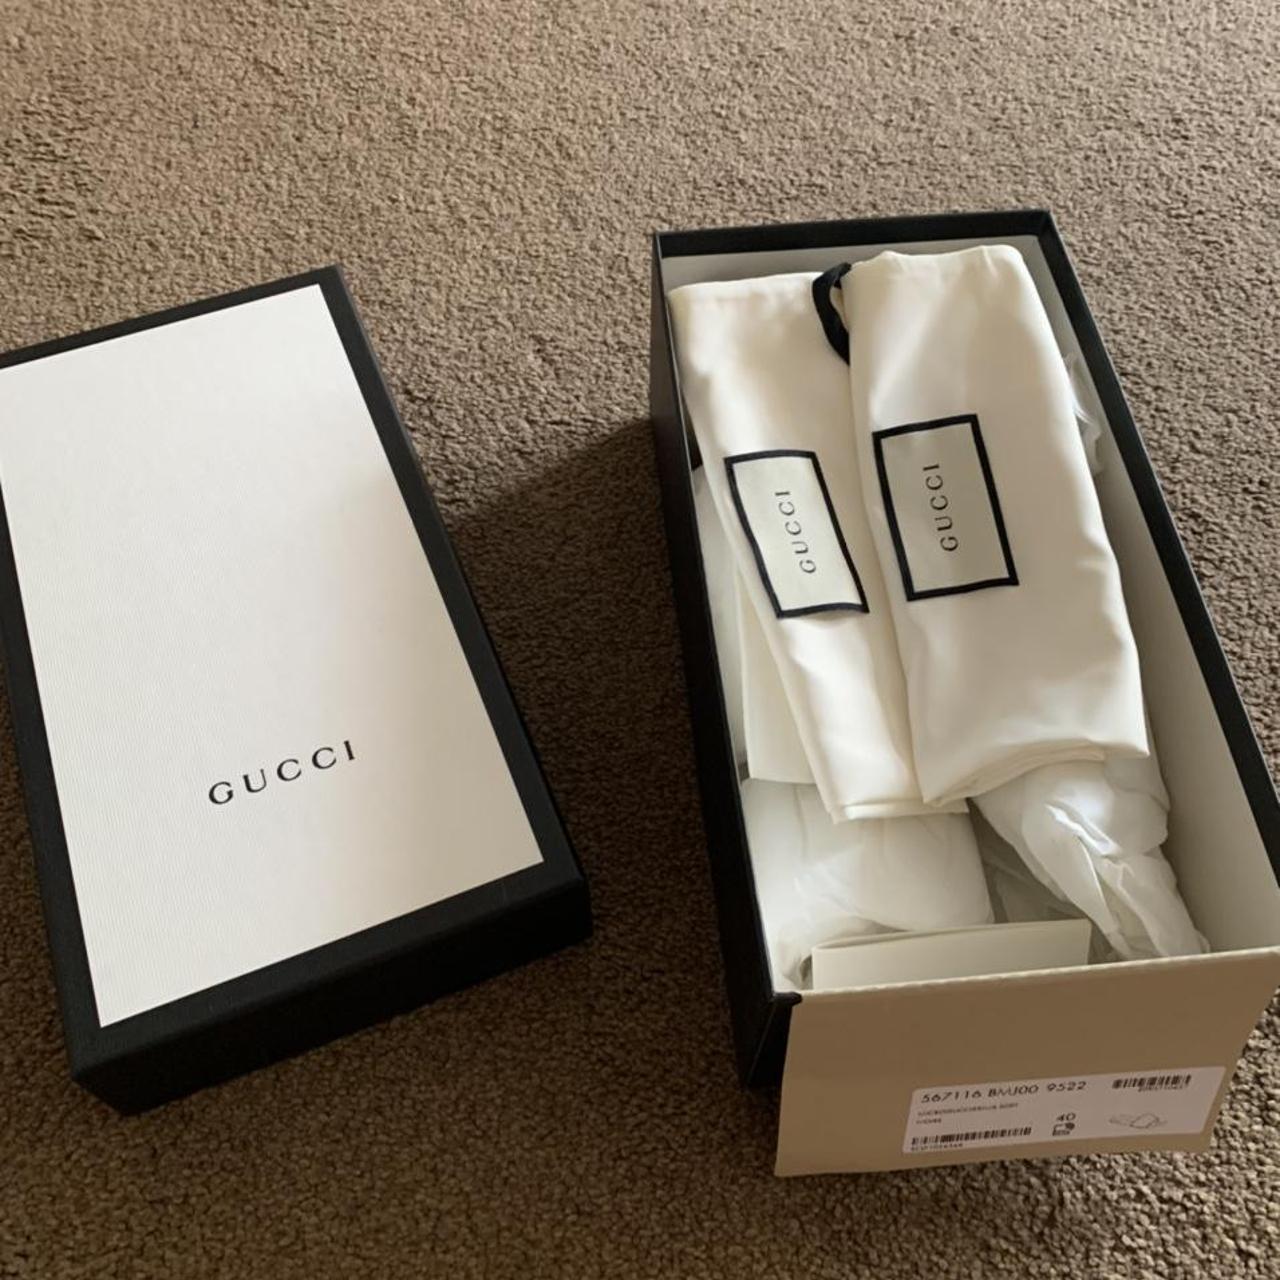 Genuine Gucci shoe box with dust bags, ribbon and... - Depop